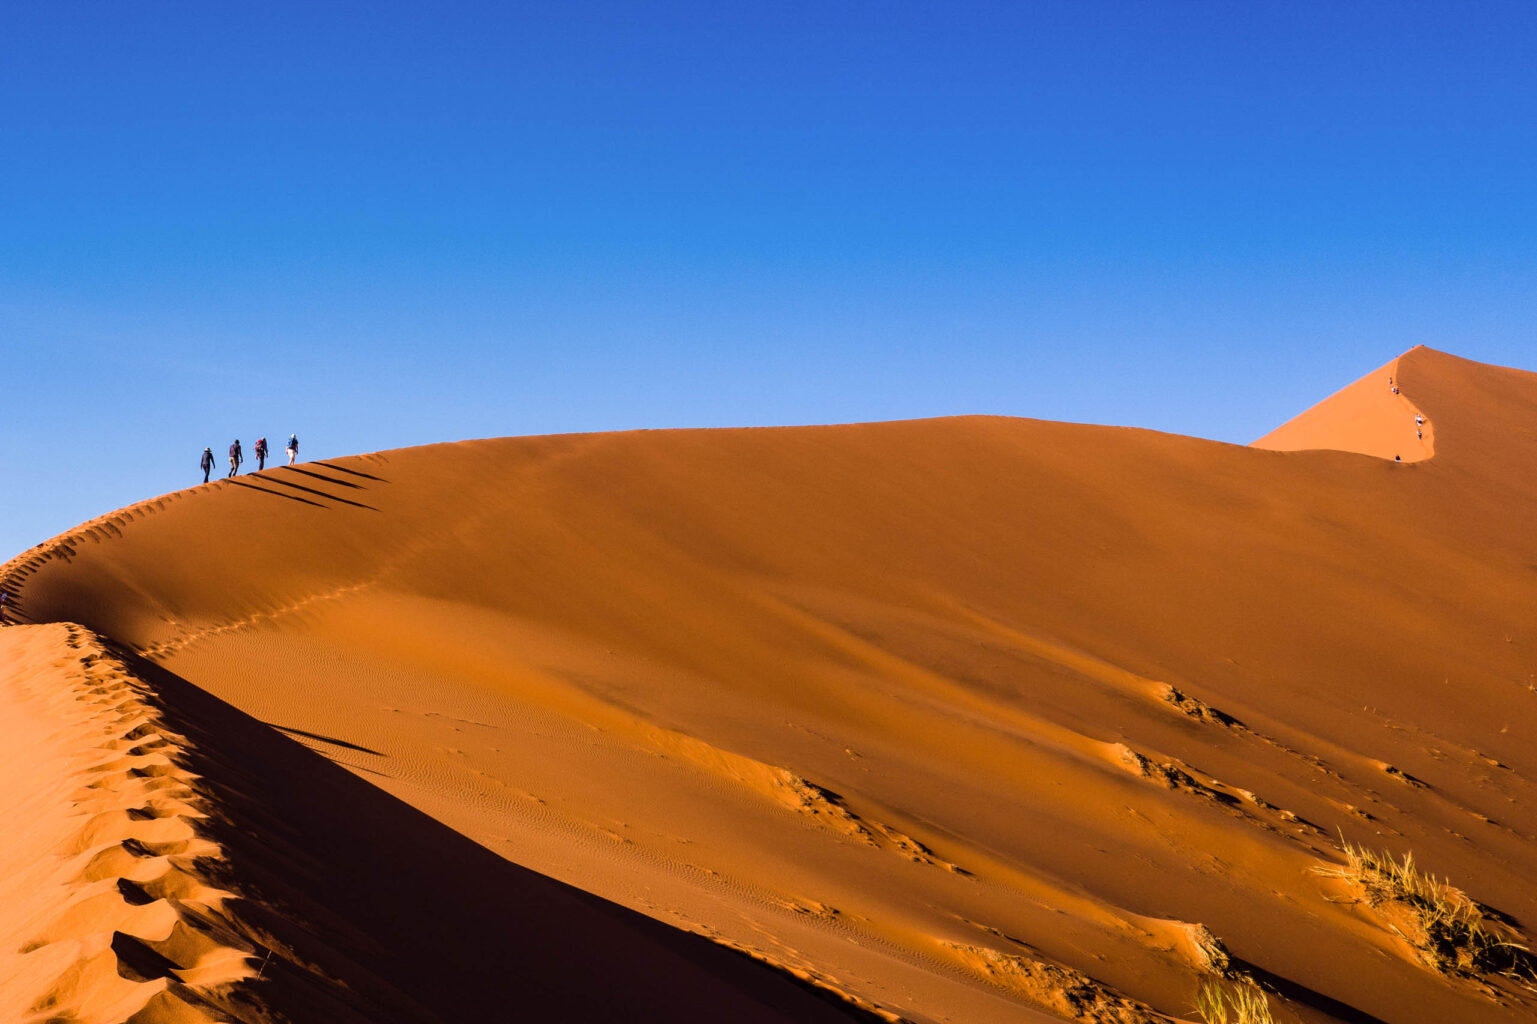 A group of people climbing the sand dunes of Sossusvlei.